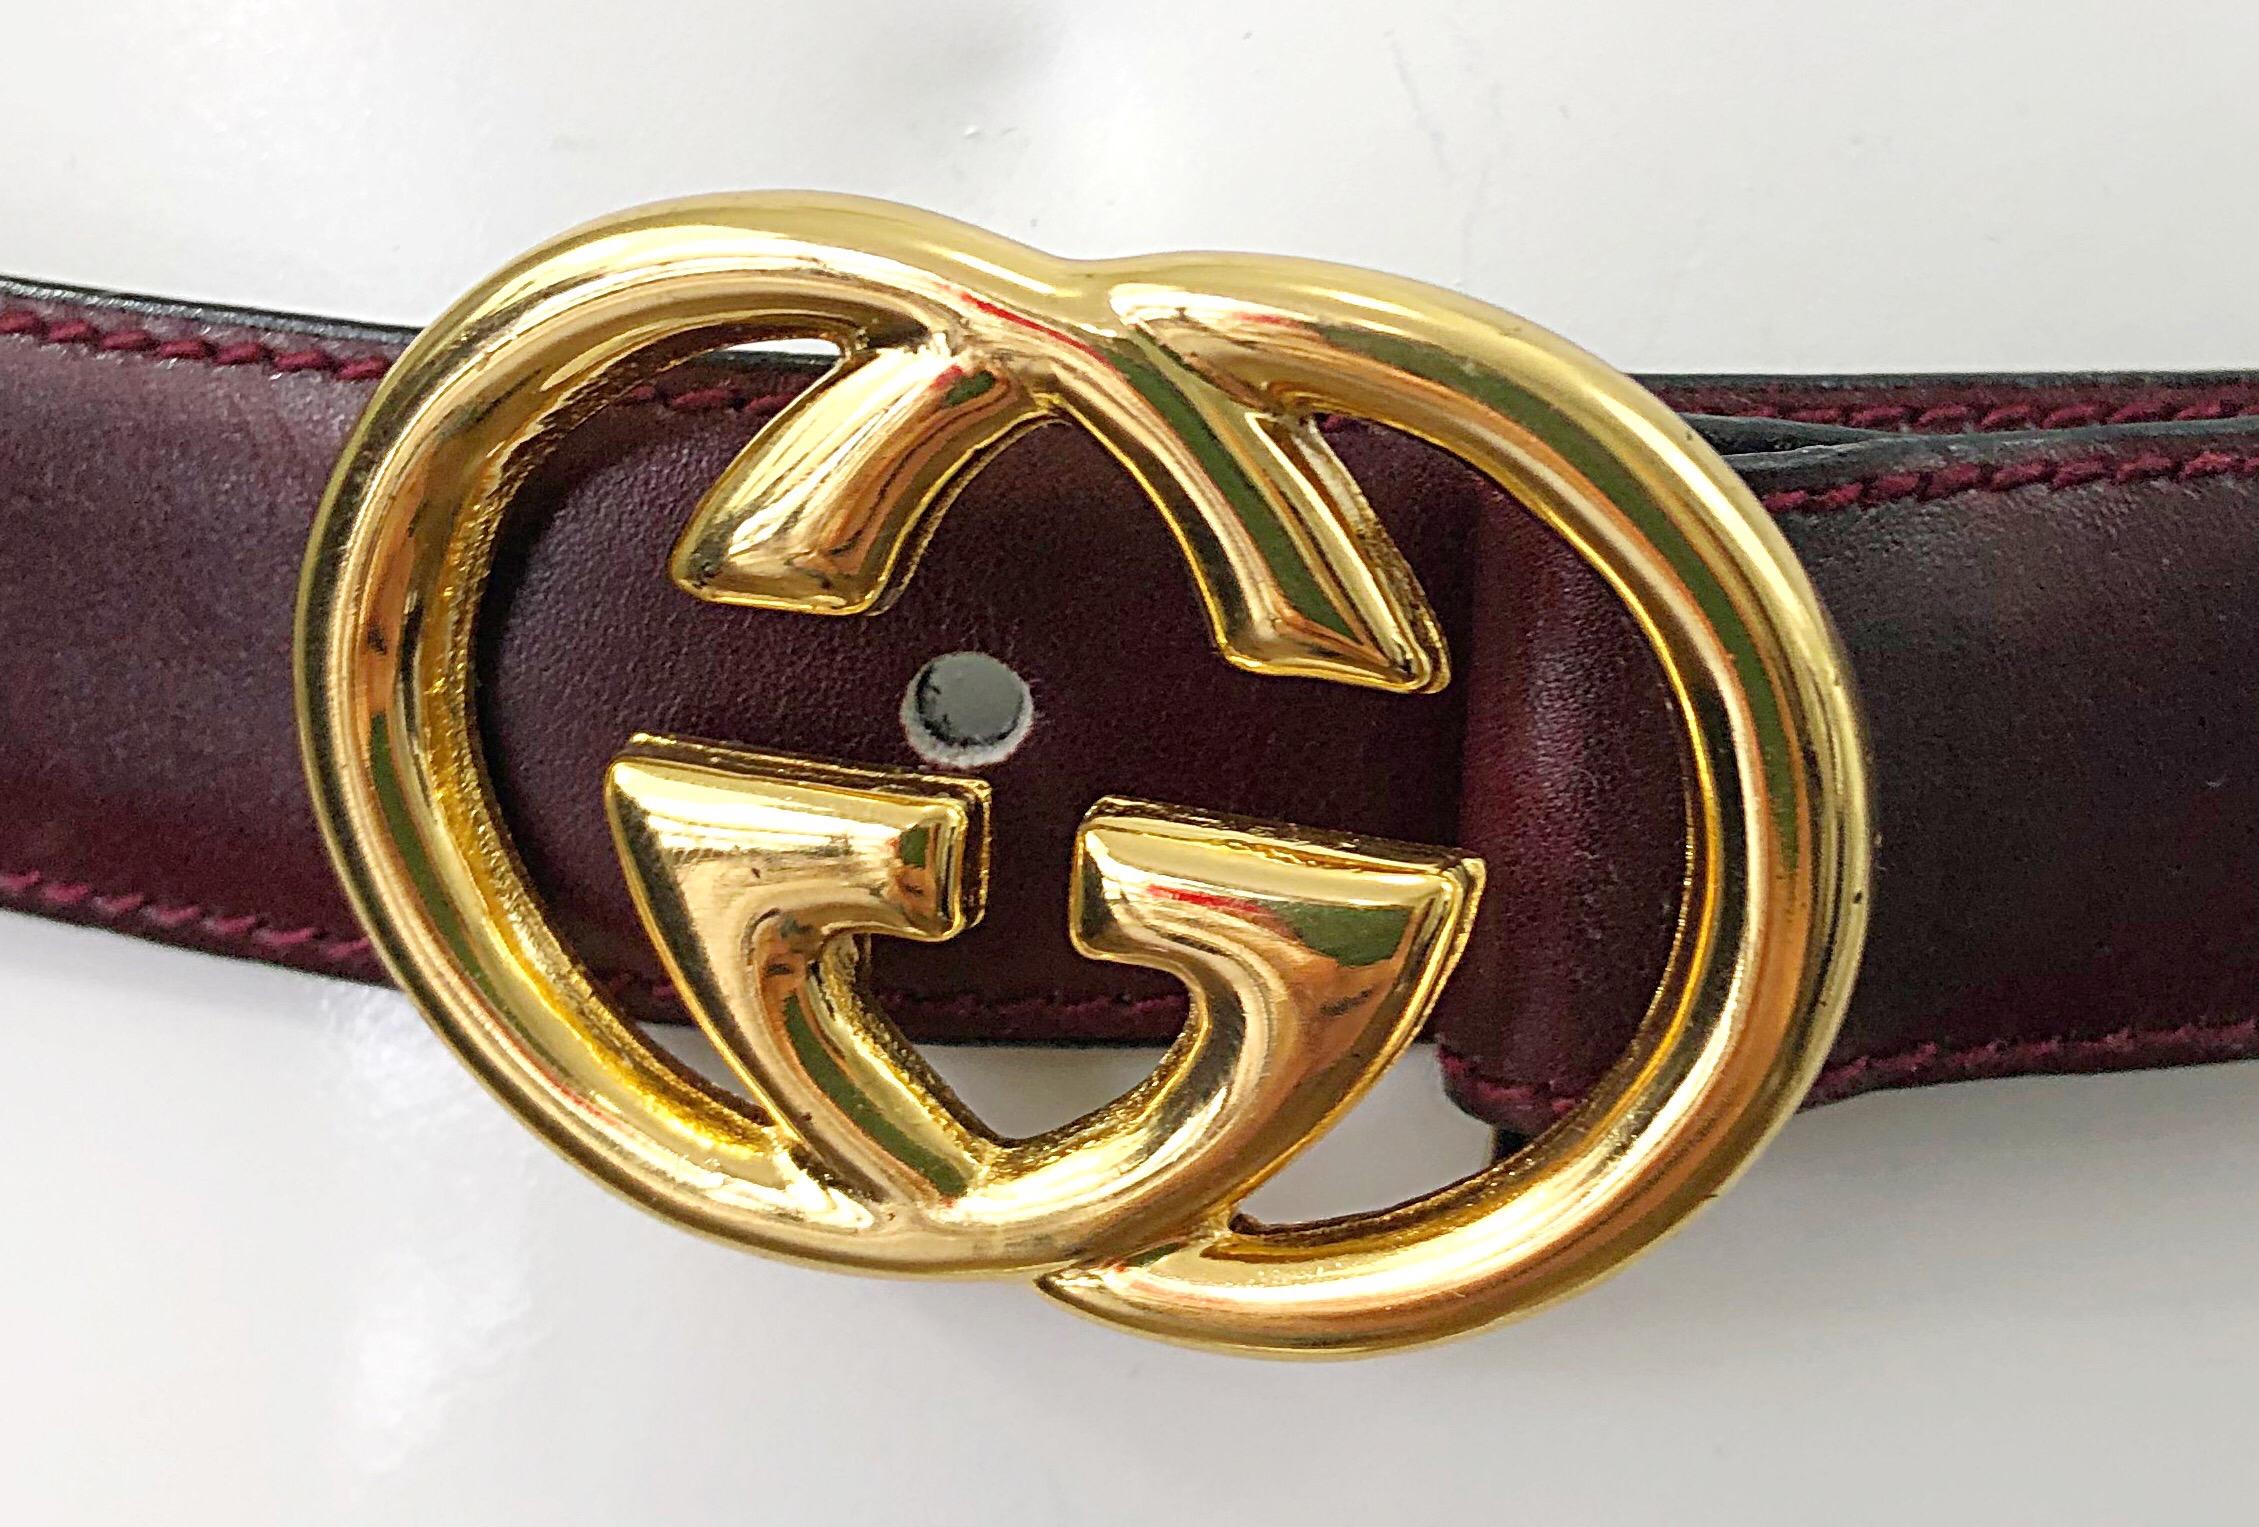 Classic 1970s GUCCI cordovan / burgundy maroon women's thin leather belt ! Features a rich cordovan color that goes with anything, and is perfect any time of year. Gold metal GG logo buckle. Great with jeans, skirt, shorts, over a blouse, or over a